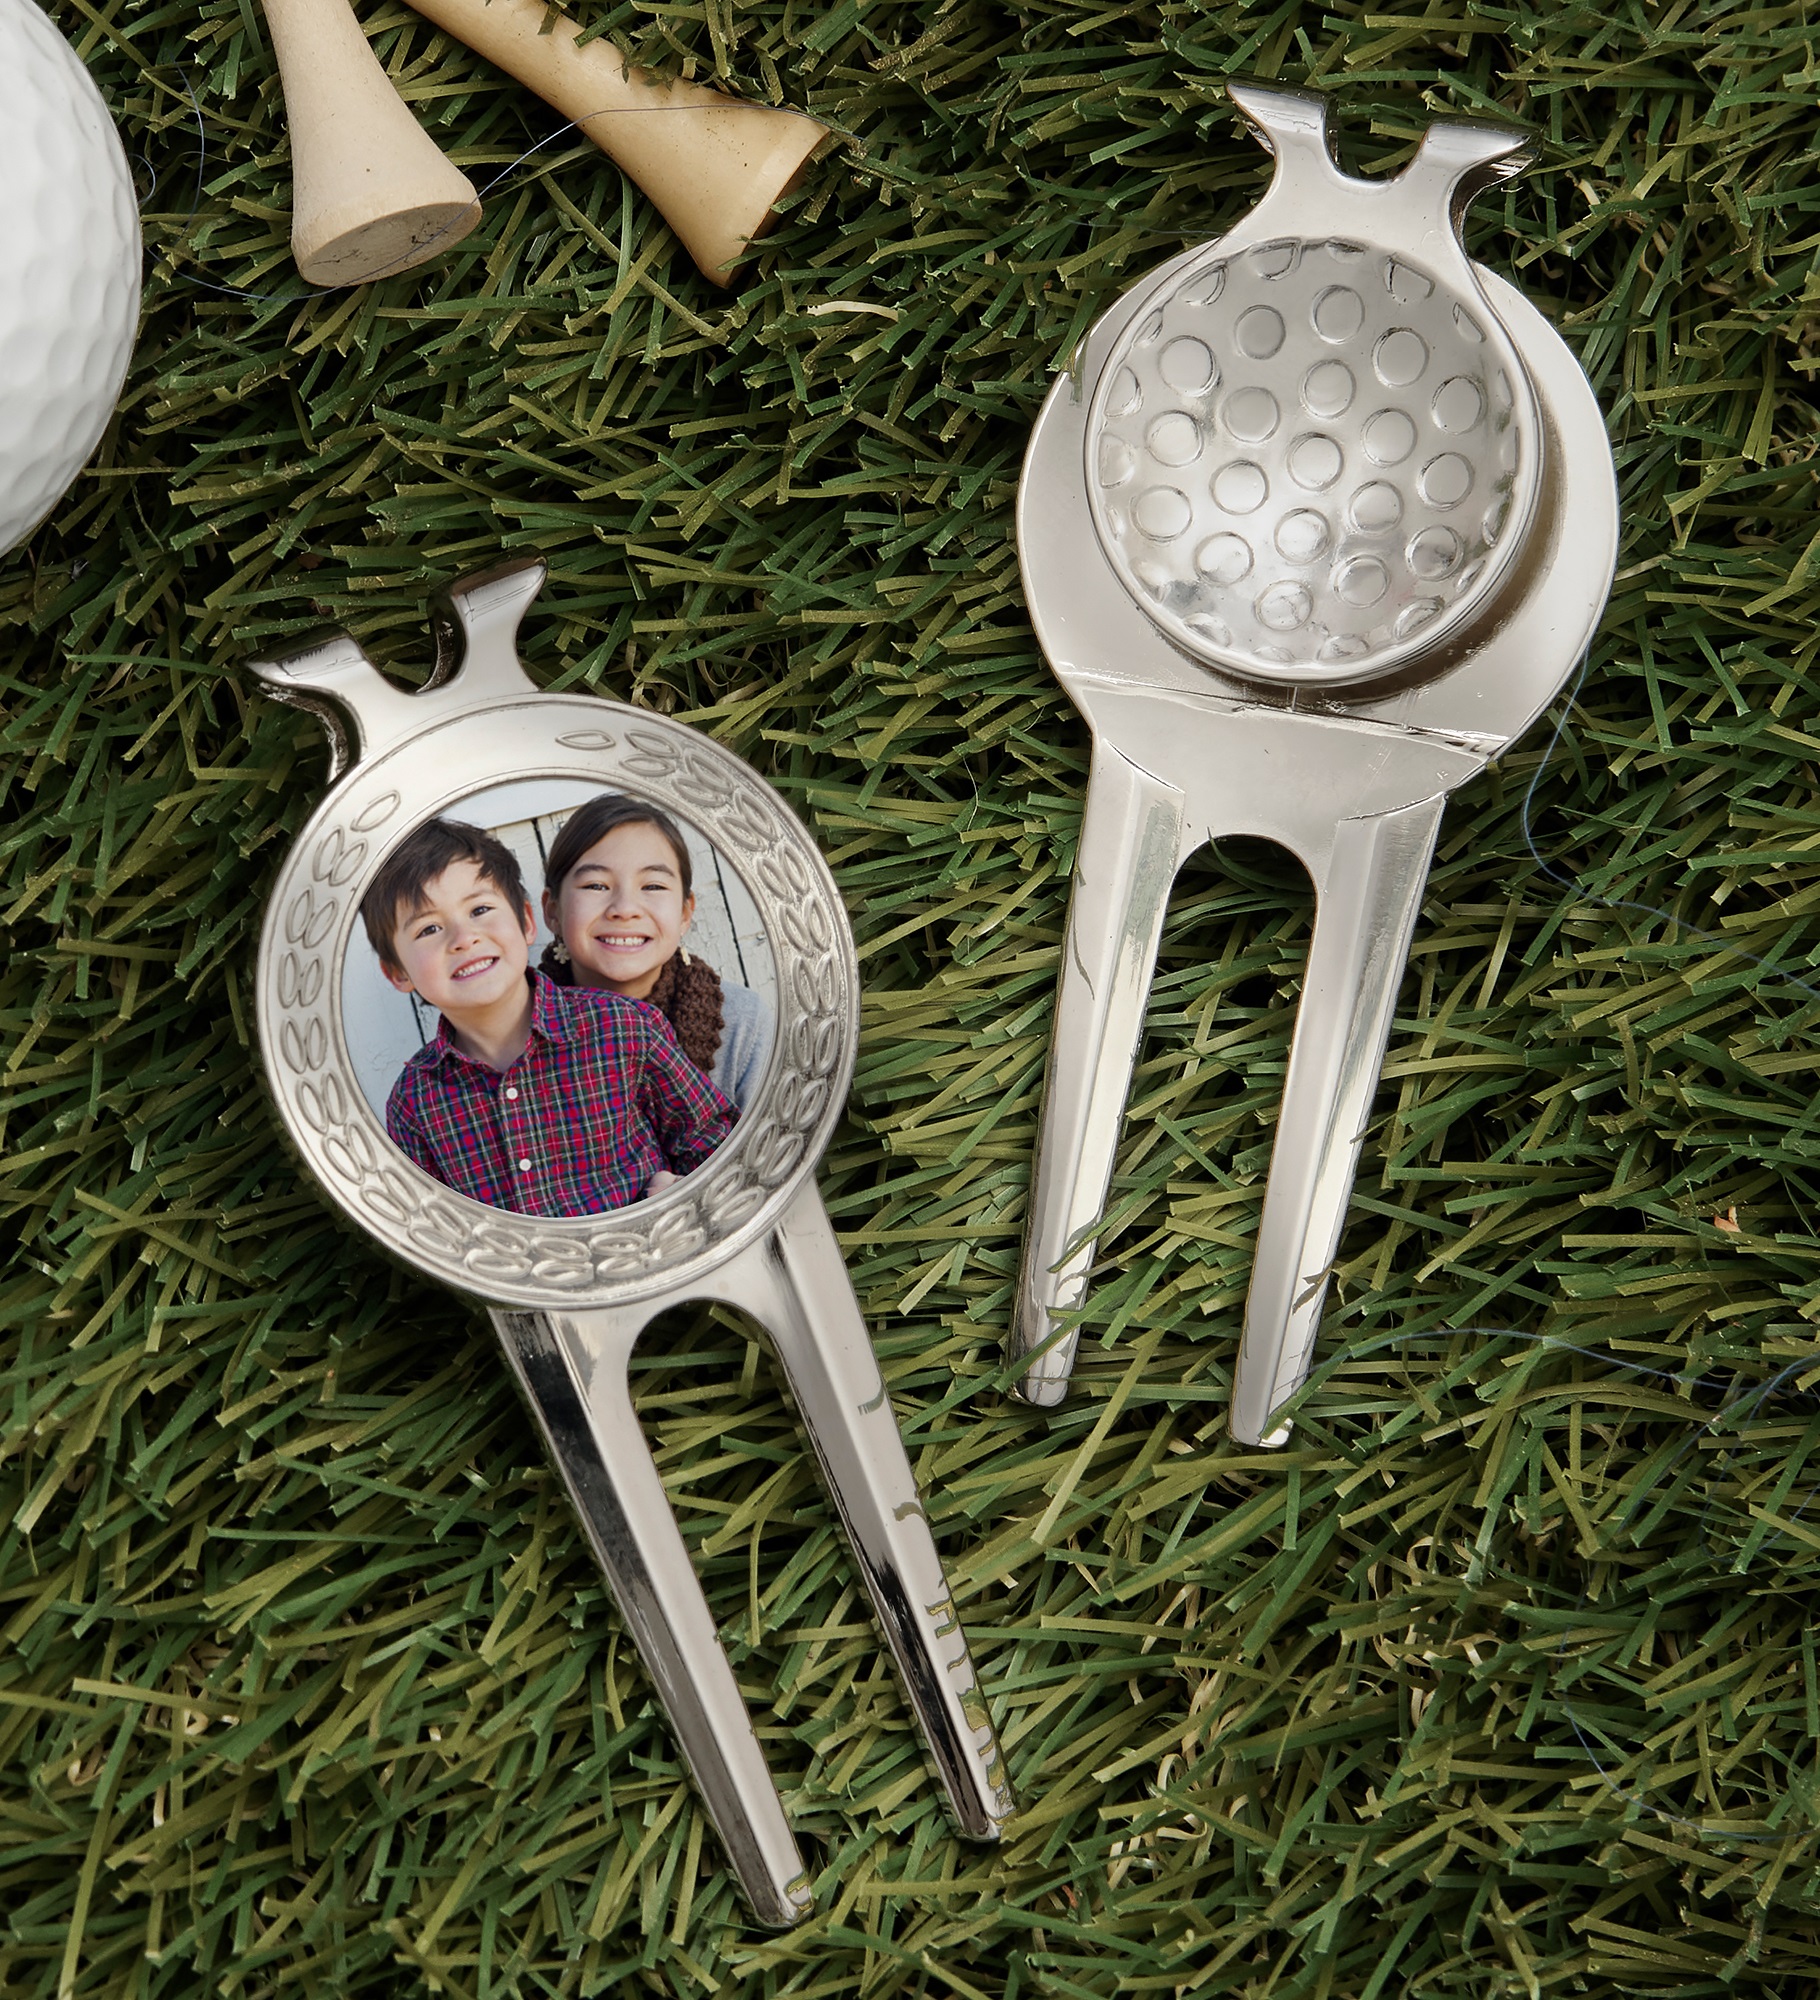 Personalized Photo Divot Tool, Ball Marker & Clip